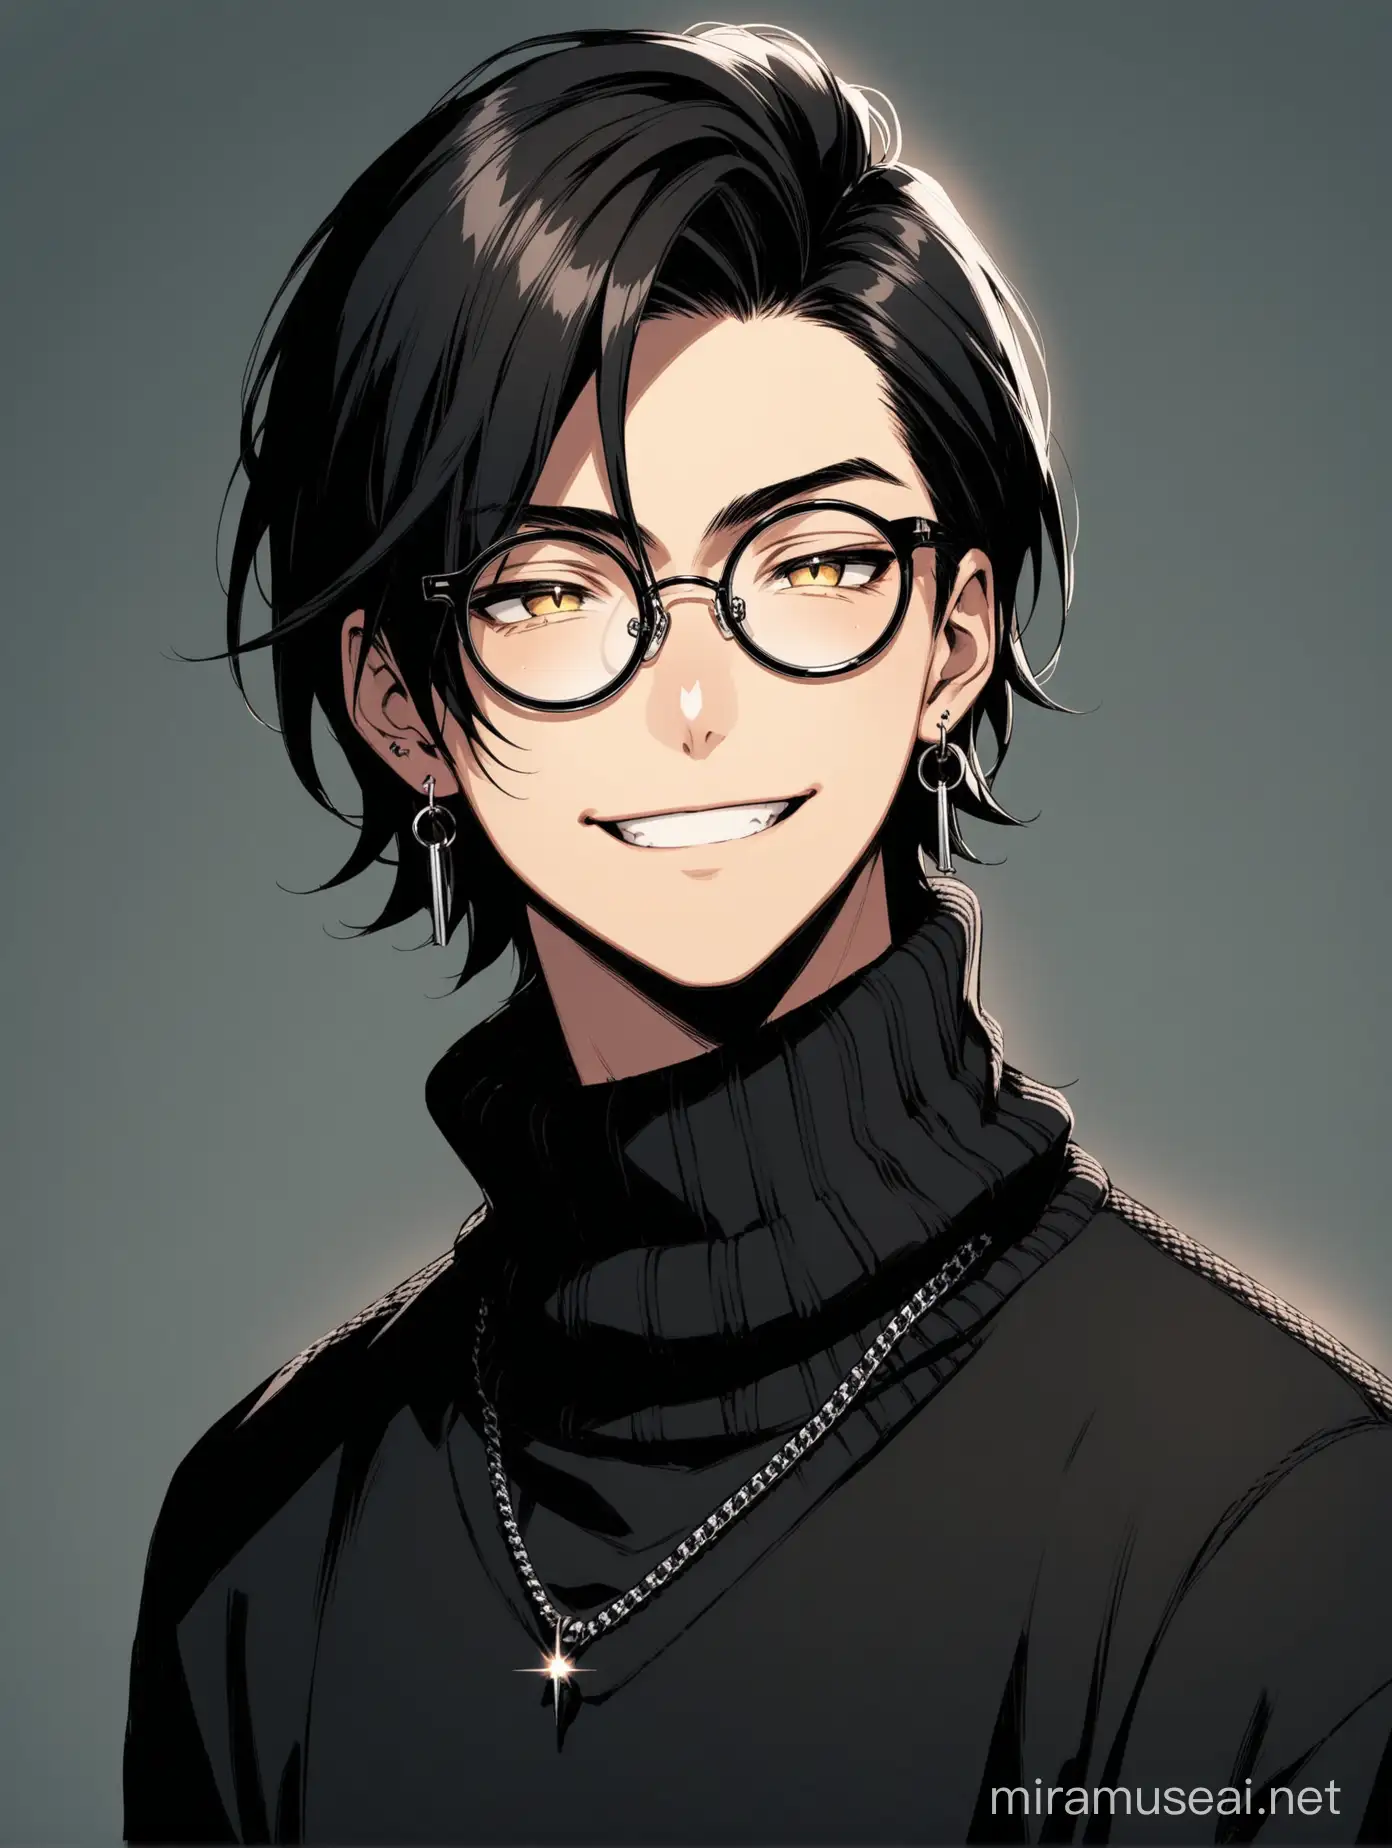 Rebellious Teenager with Mysterious Charm and Black Round Glasses